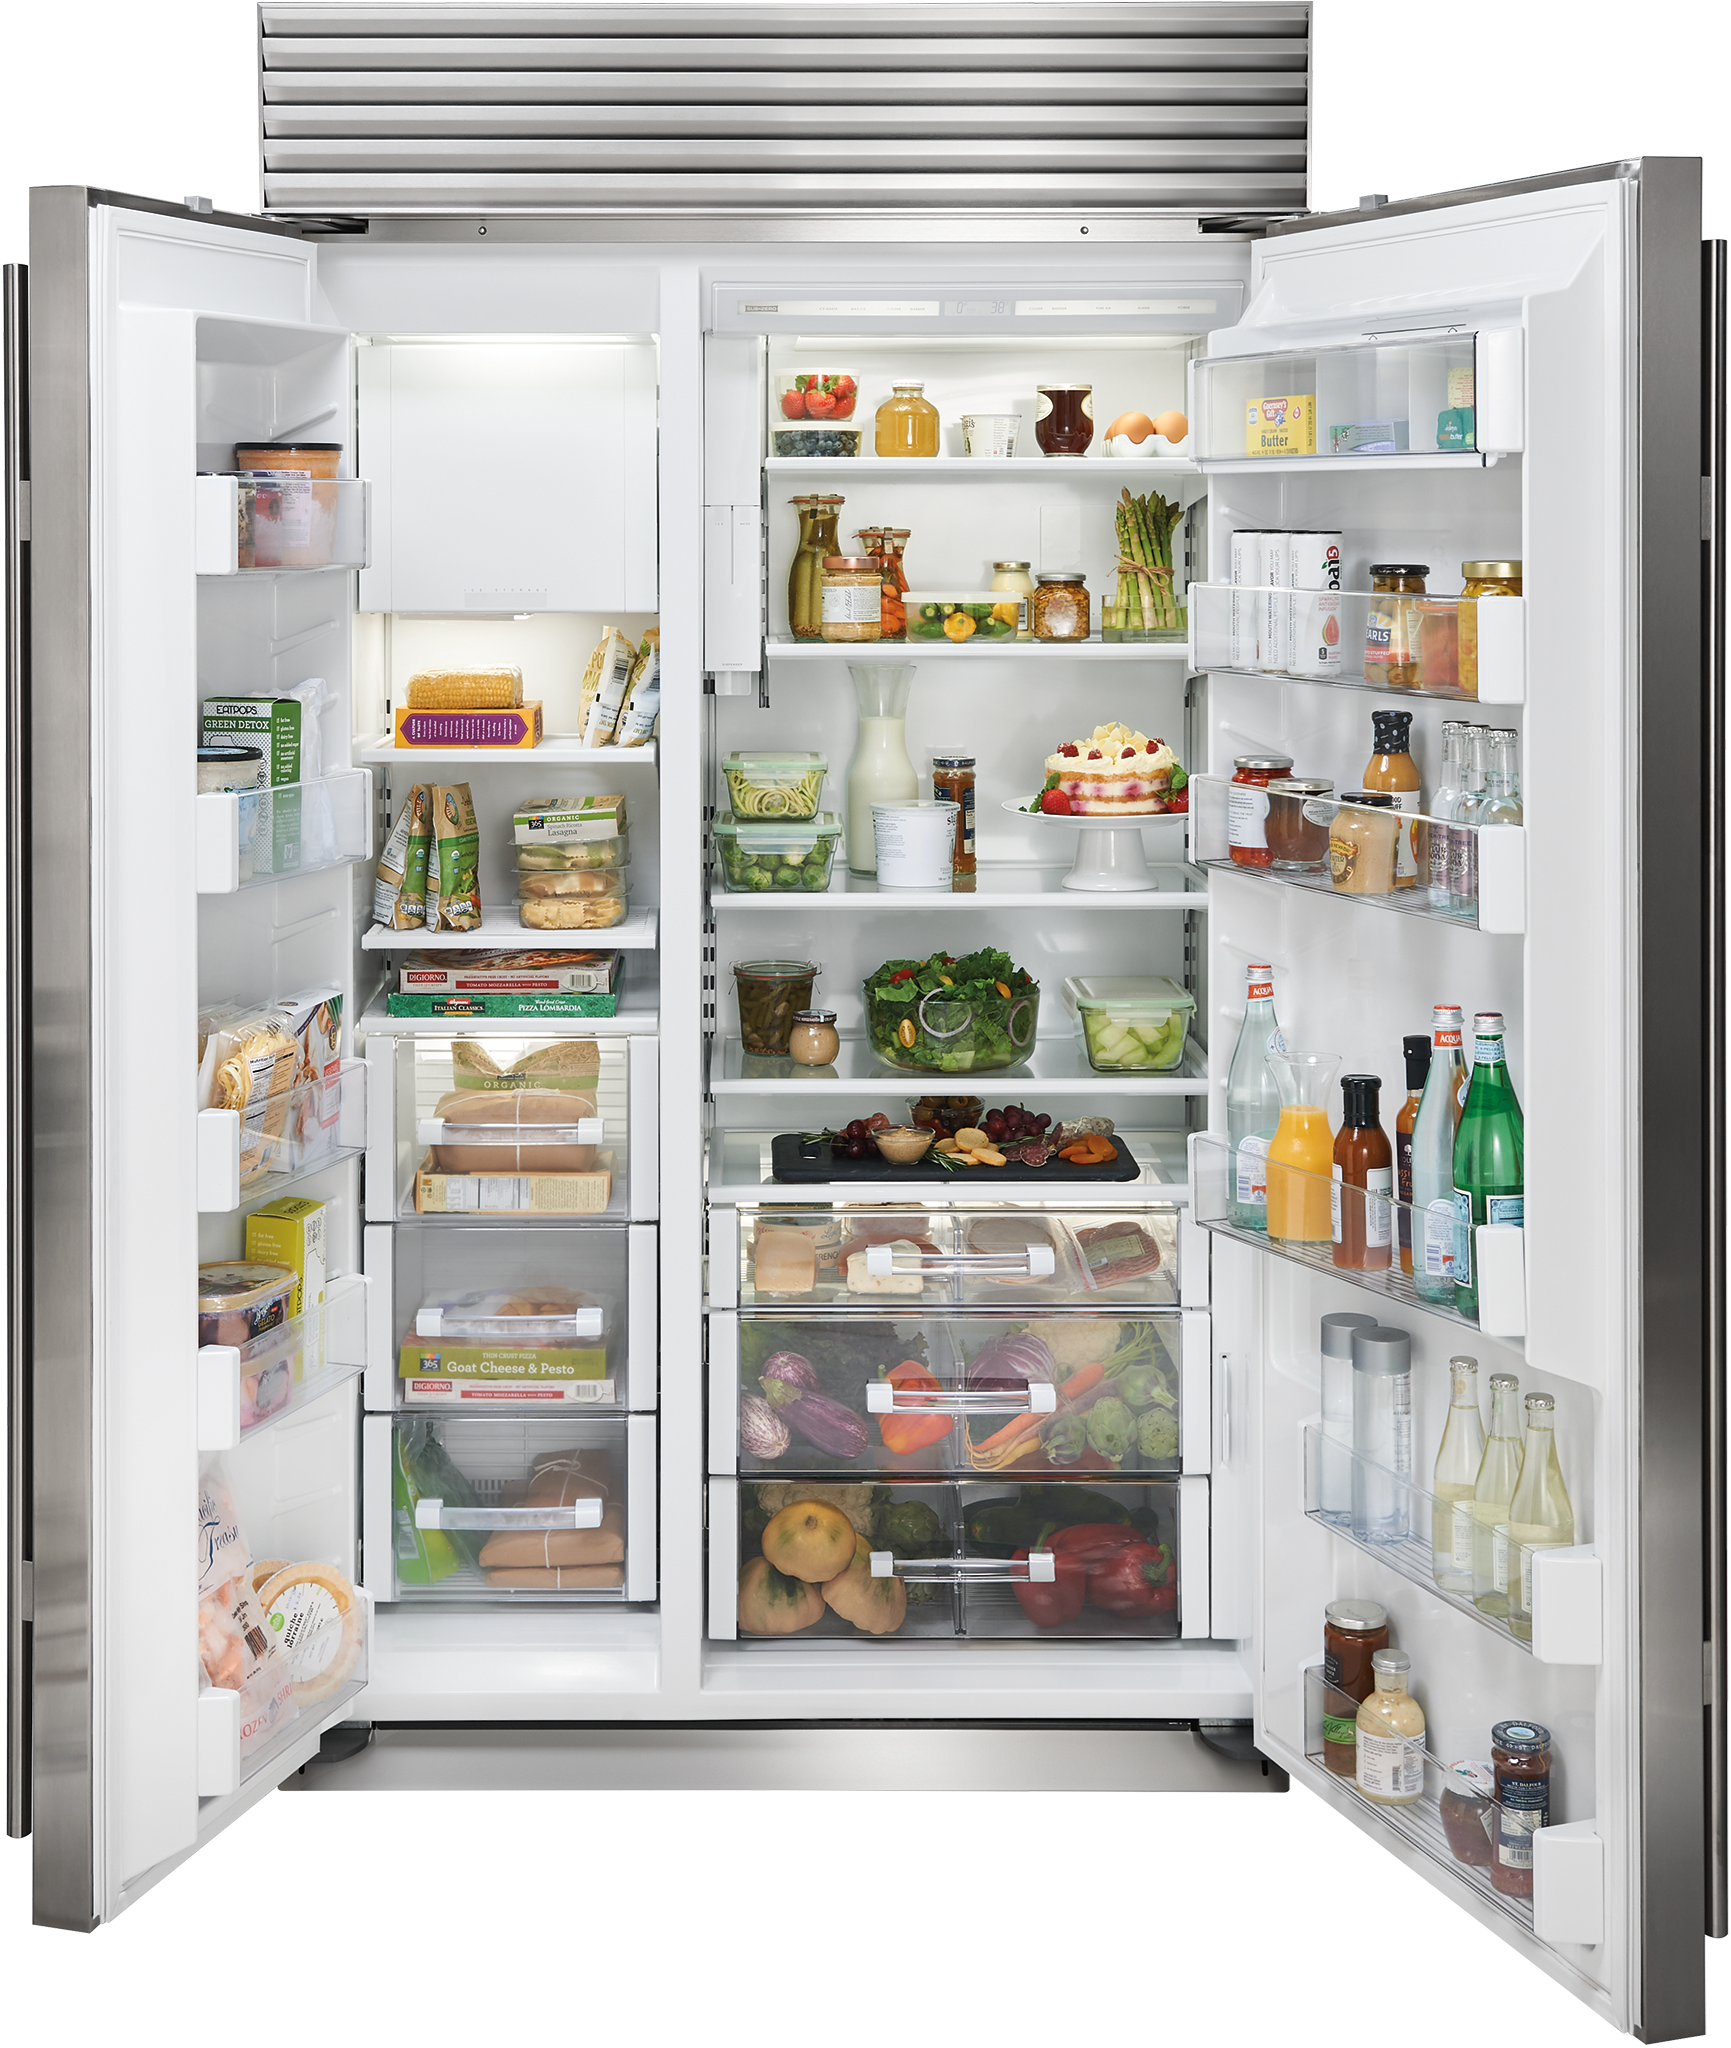 48" SUBZERO Built-In Side-by-Side Refrigerator/Freezer with Internal D...